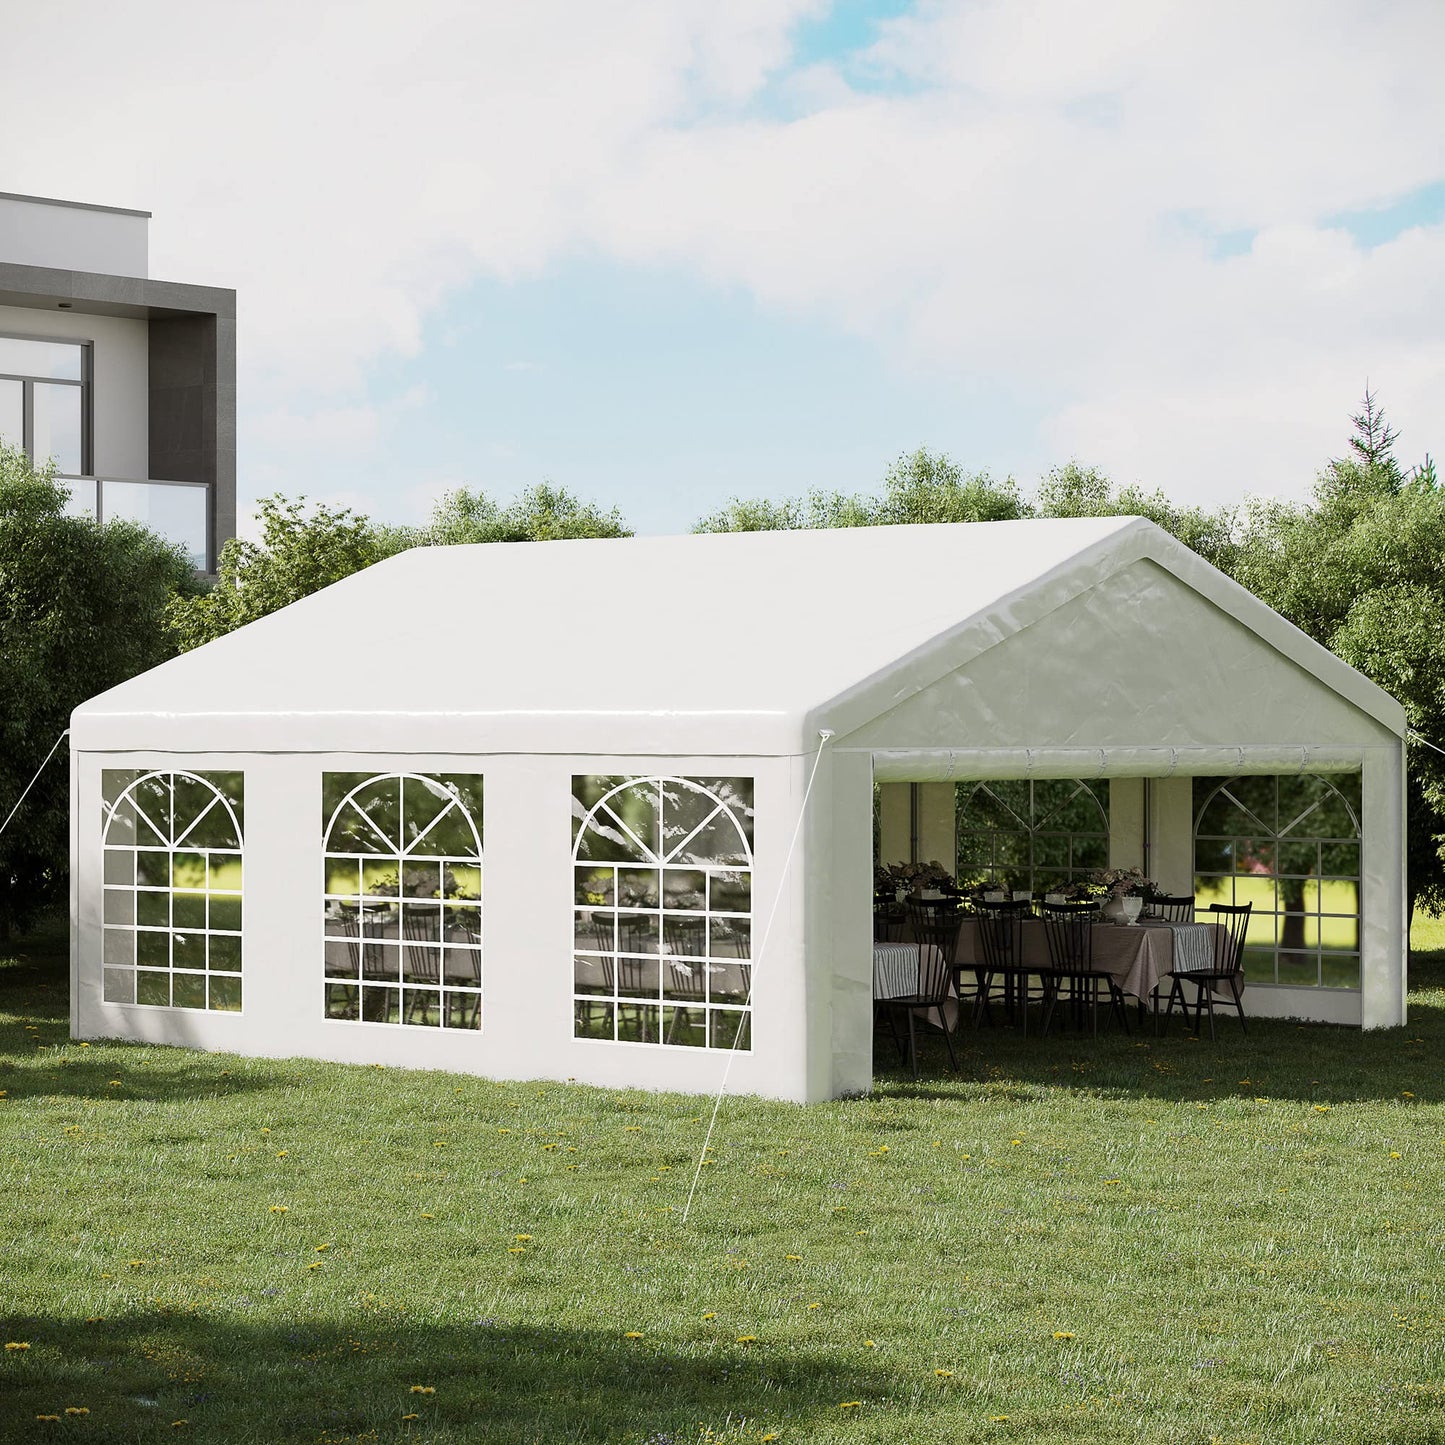 Outsunny 20' x 20' Heavy Duty Party Tent & Carport with Removable Sidewalls and 2 Doors, Outdoor Canopy Tent Sun Shade Shelter, for Parties, Wedding, Events, BBQ Grill, White 20' x 20'